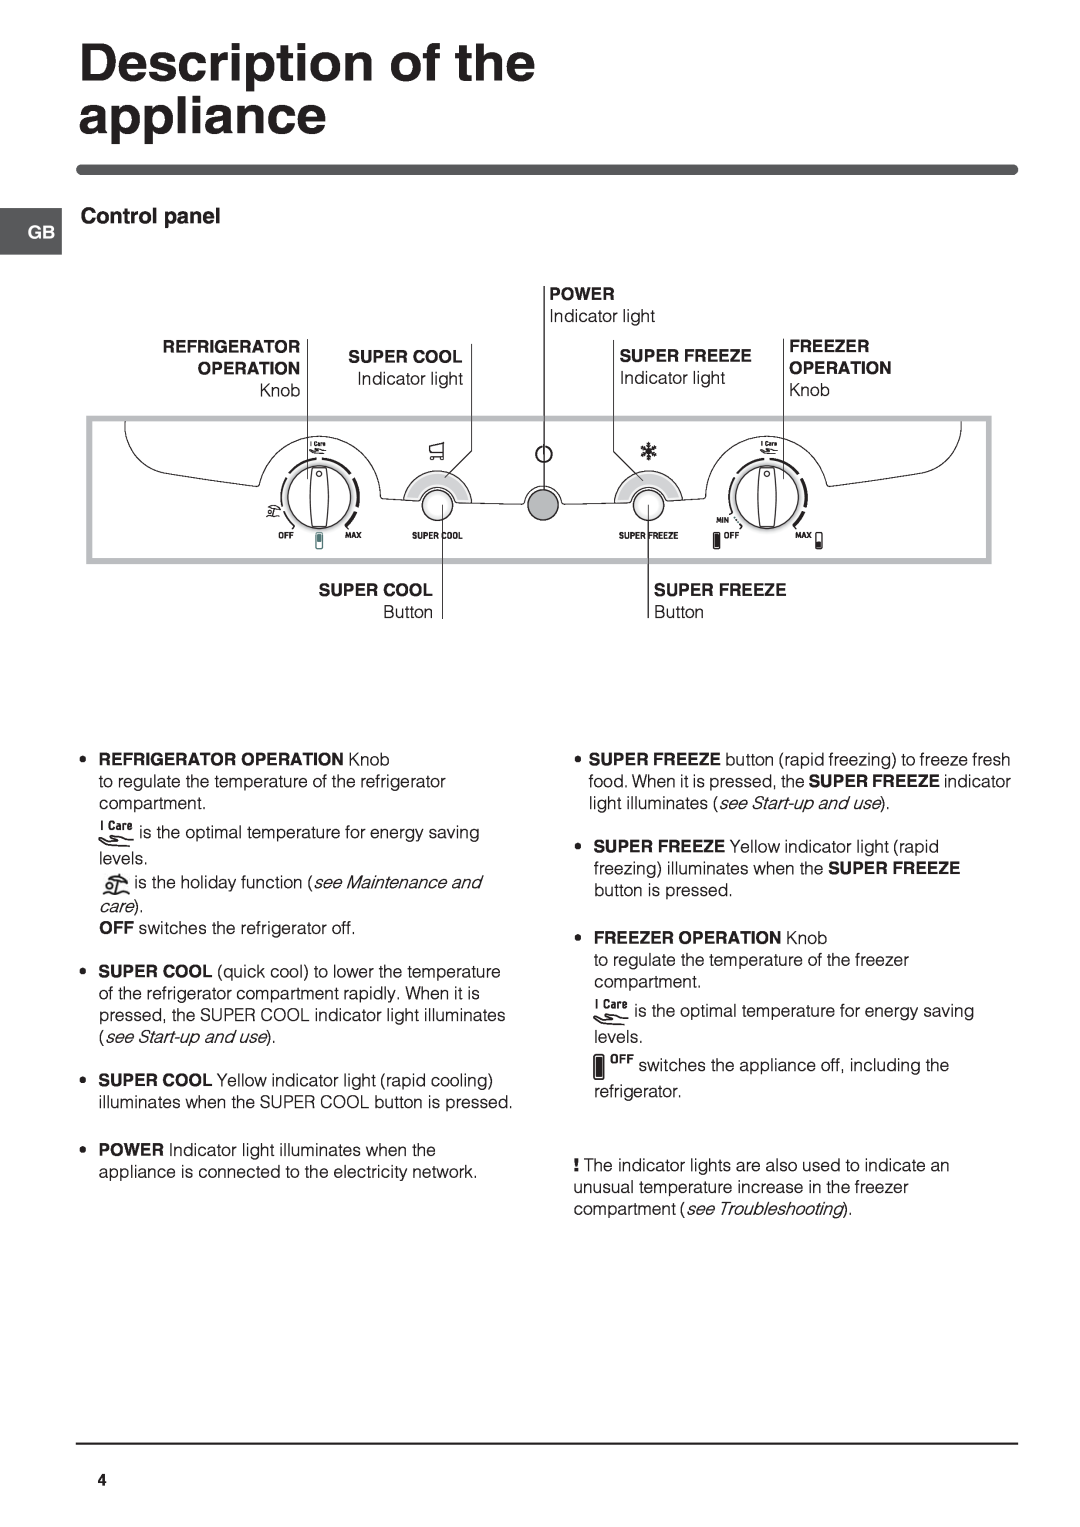 Hotpoint FF200LG manual Description of the appliance, Control panel 